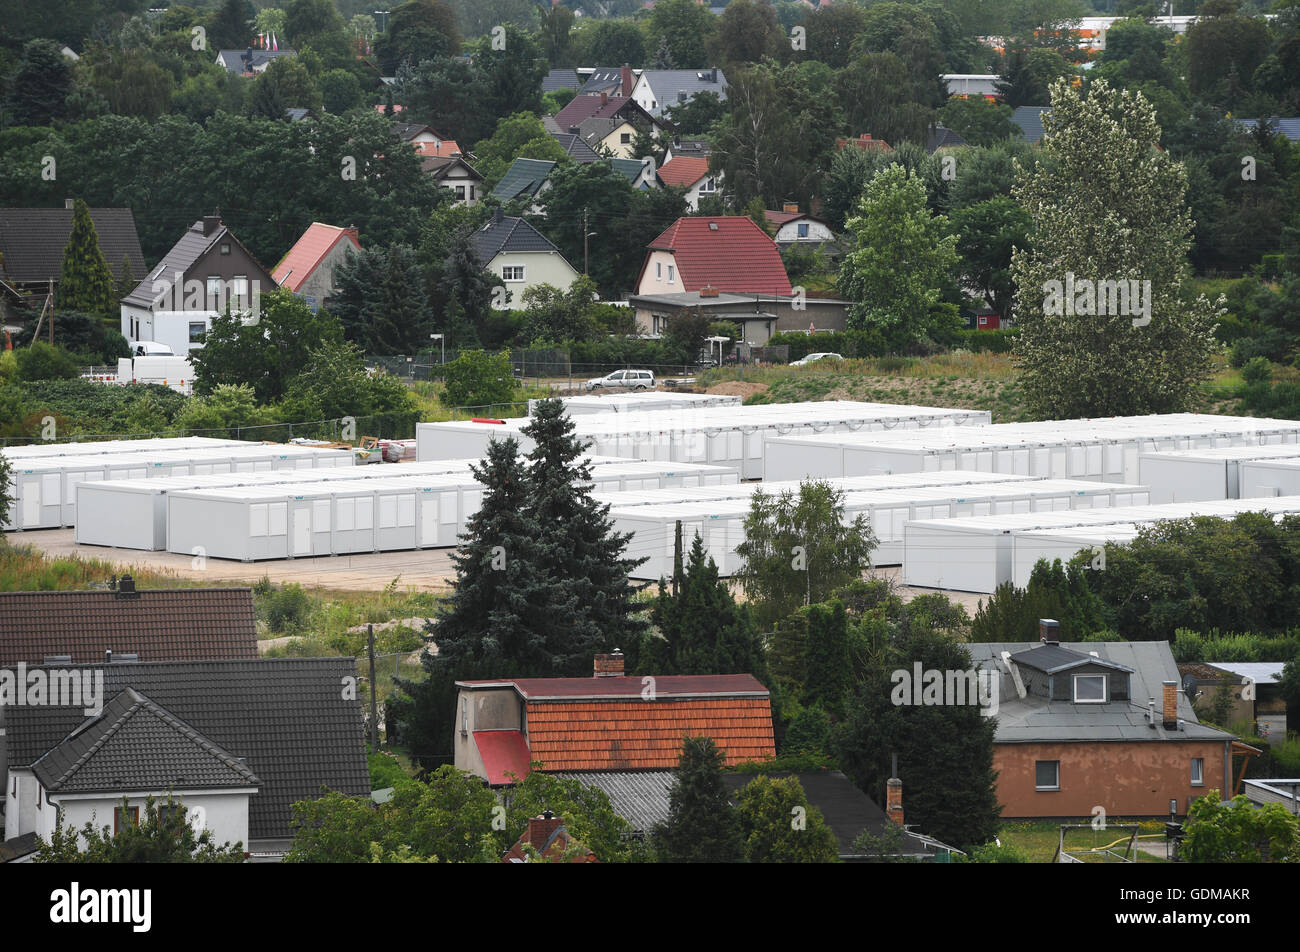 Berlin, Germany. 19th July, 2016. White containers can be seen between houses on Venus-Strasse in Berlin, Germany, 19 July 2016. The administrative court has set an appointment for an on-site visit ahead of their decision on communal accommodations for refugees in Alt-Glienicke. Photo: SOEREN STACHE/dpa/Alamy Live News Stock Photo